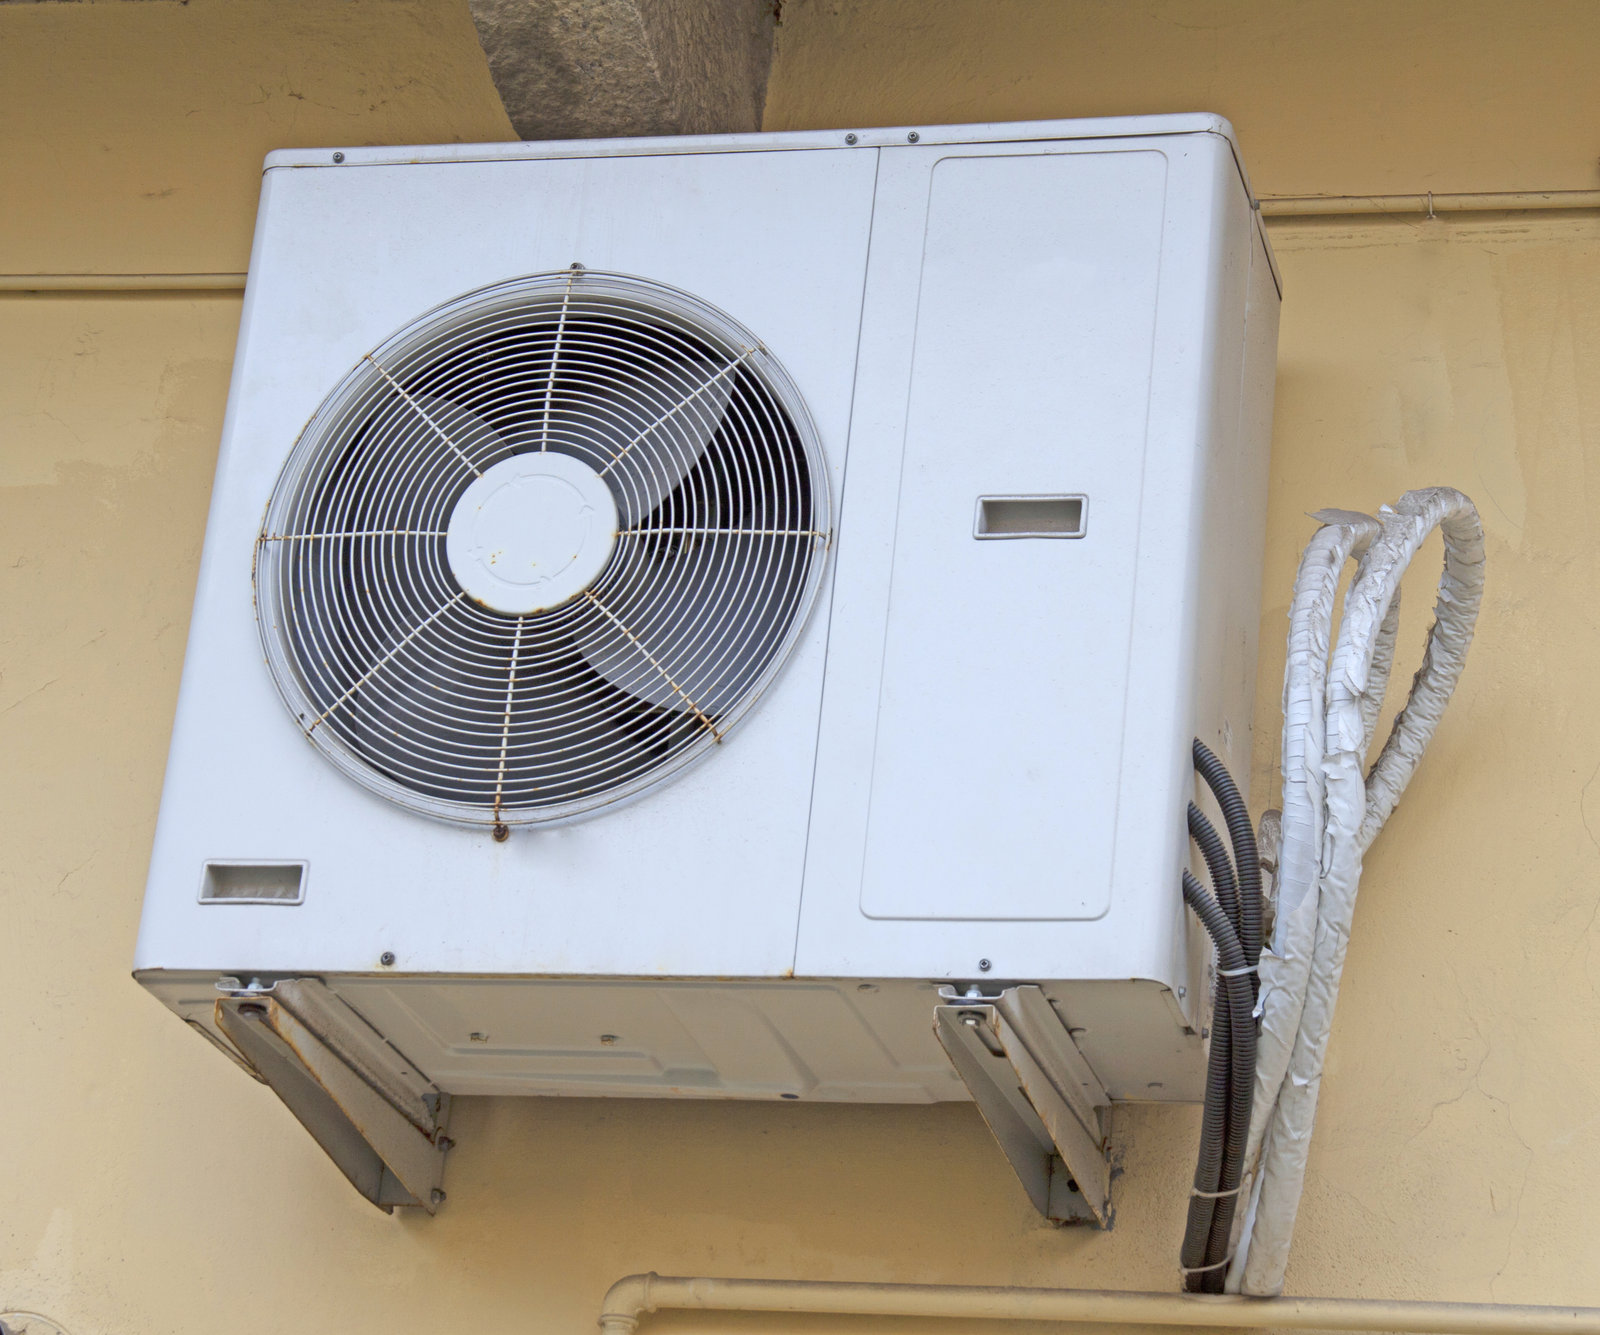 How to Give Your Air Conditioner a Refreshing Clean